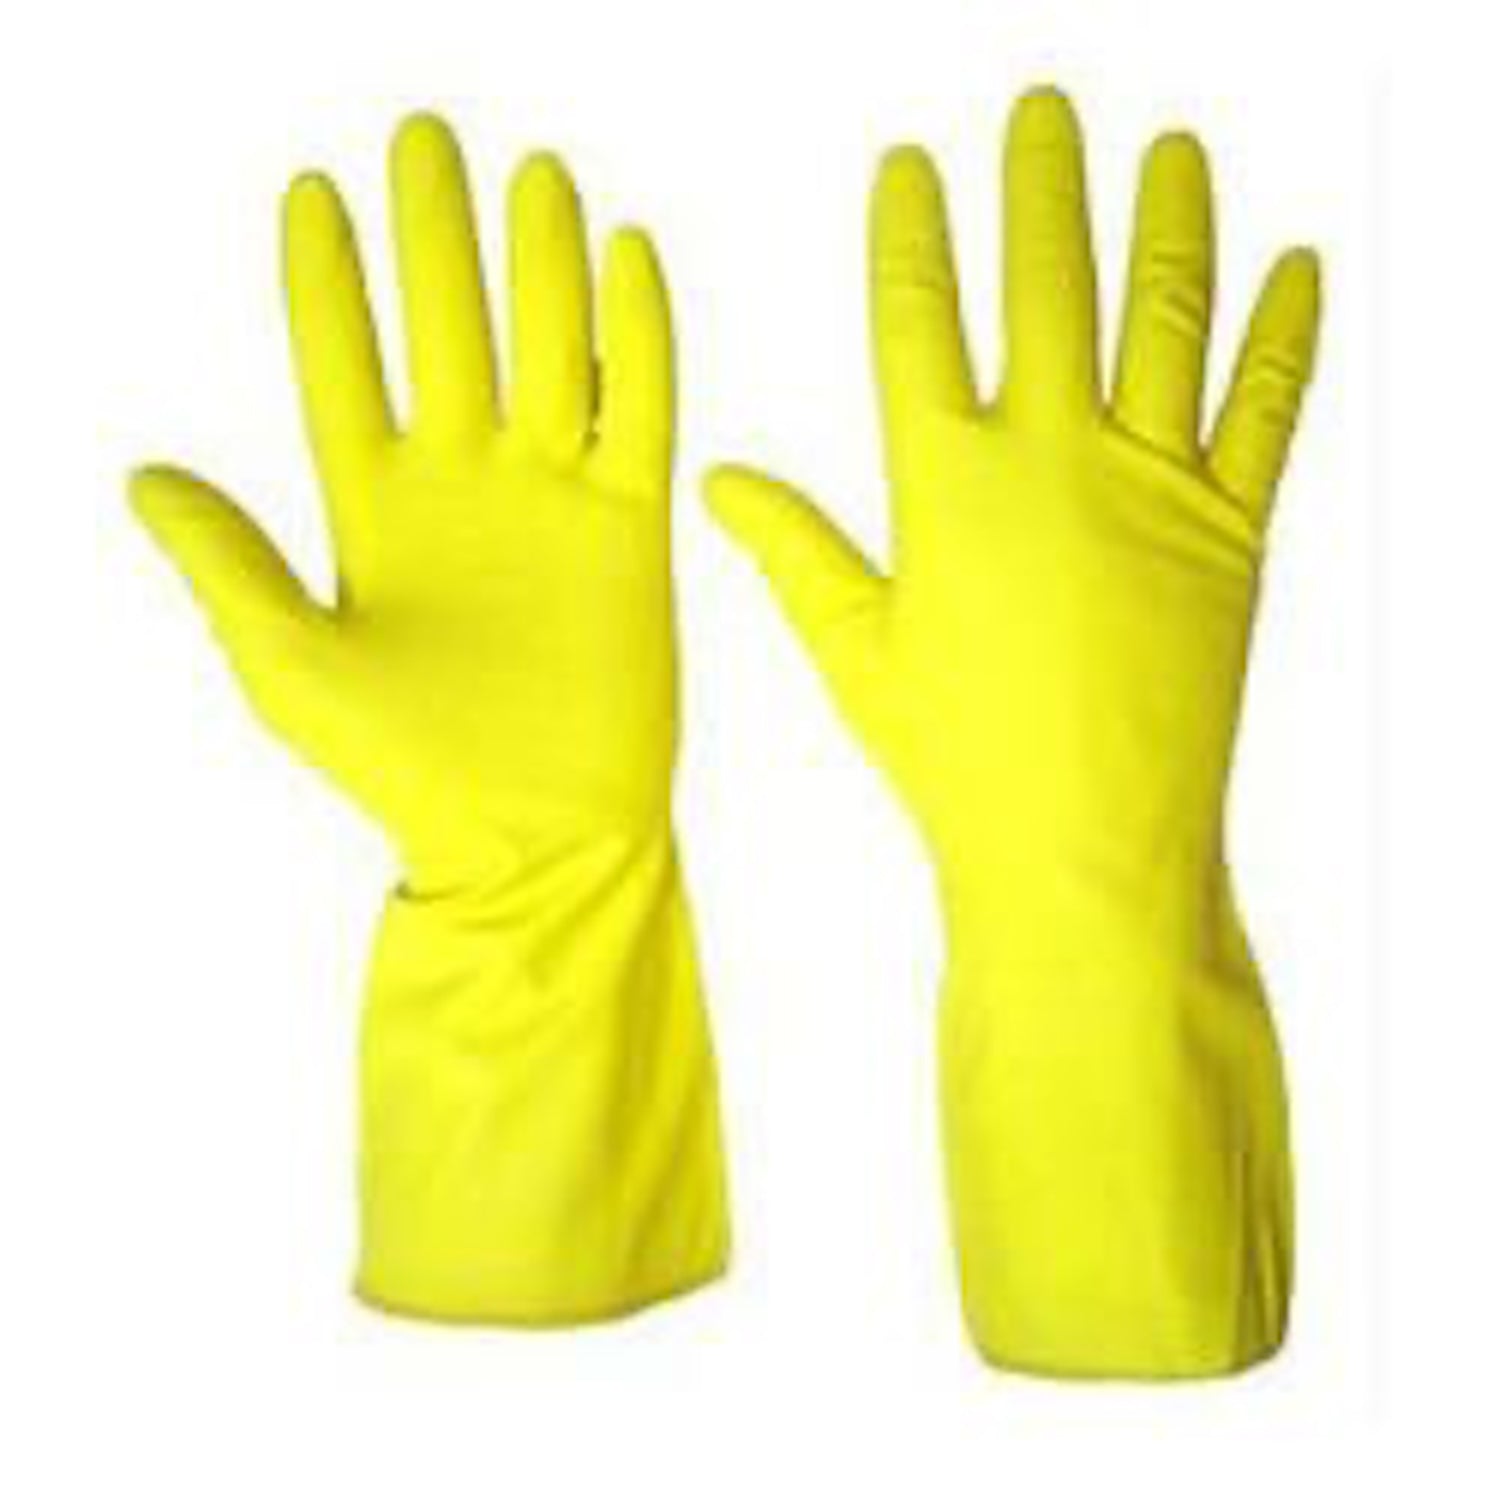 Rubber Gloves | Small | Yellow | Single | Short Expiry Date (1)